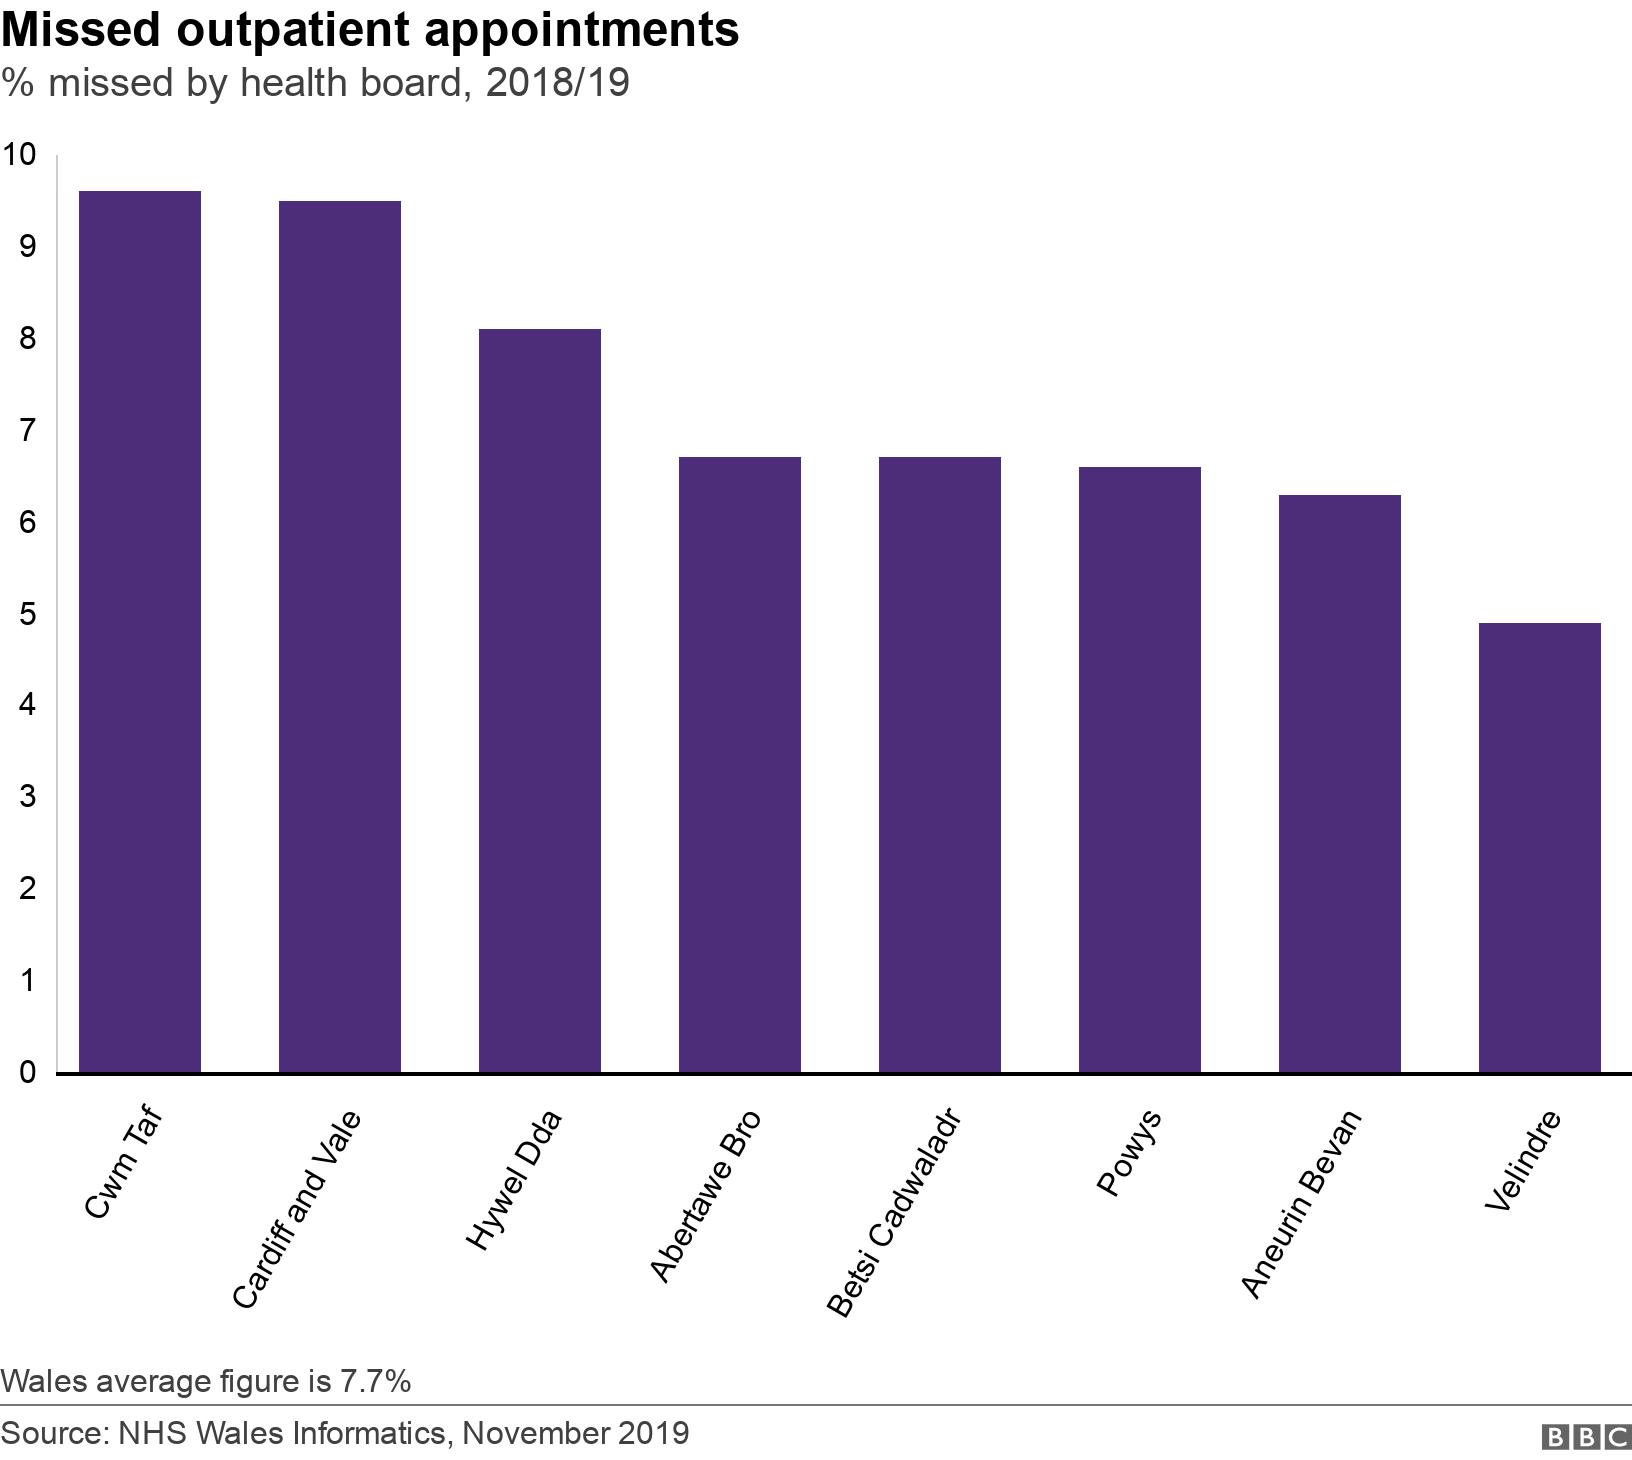 Missed outpatient appointments. % missed by health board, 2018/19. Wales average figure is 7.7%.